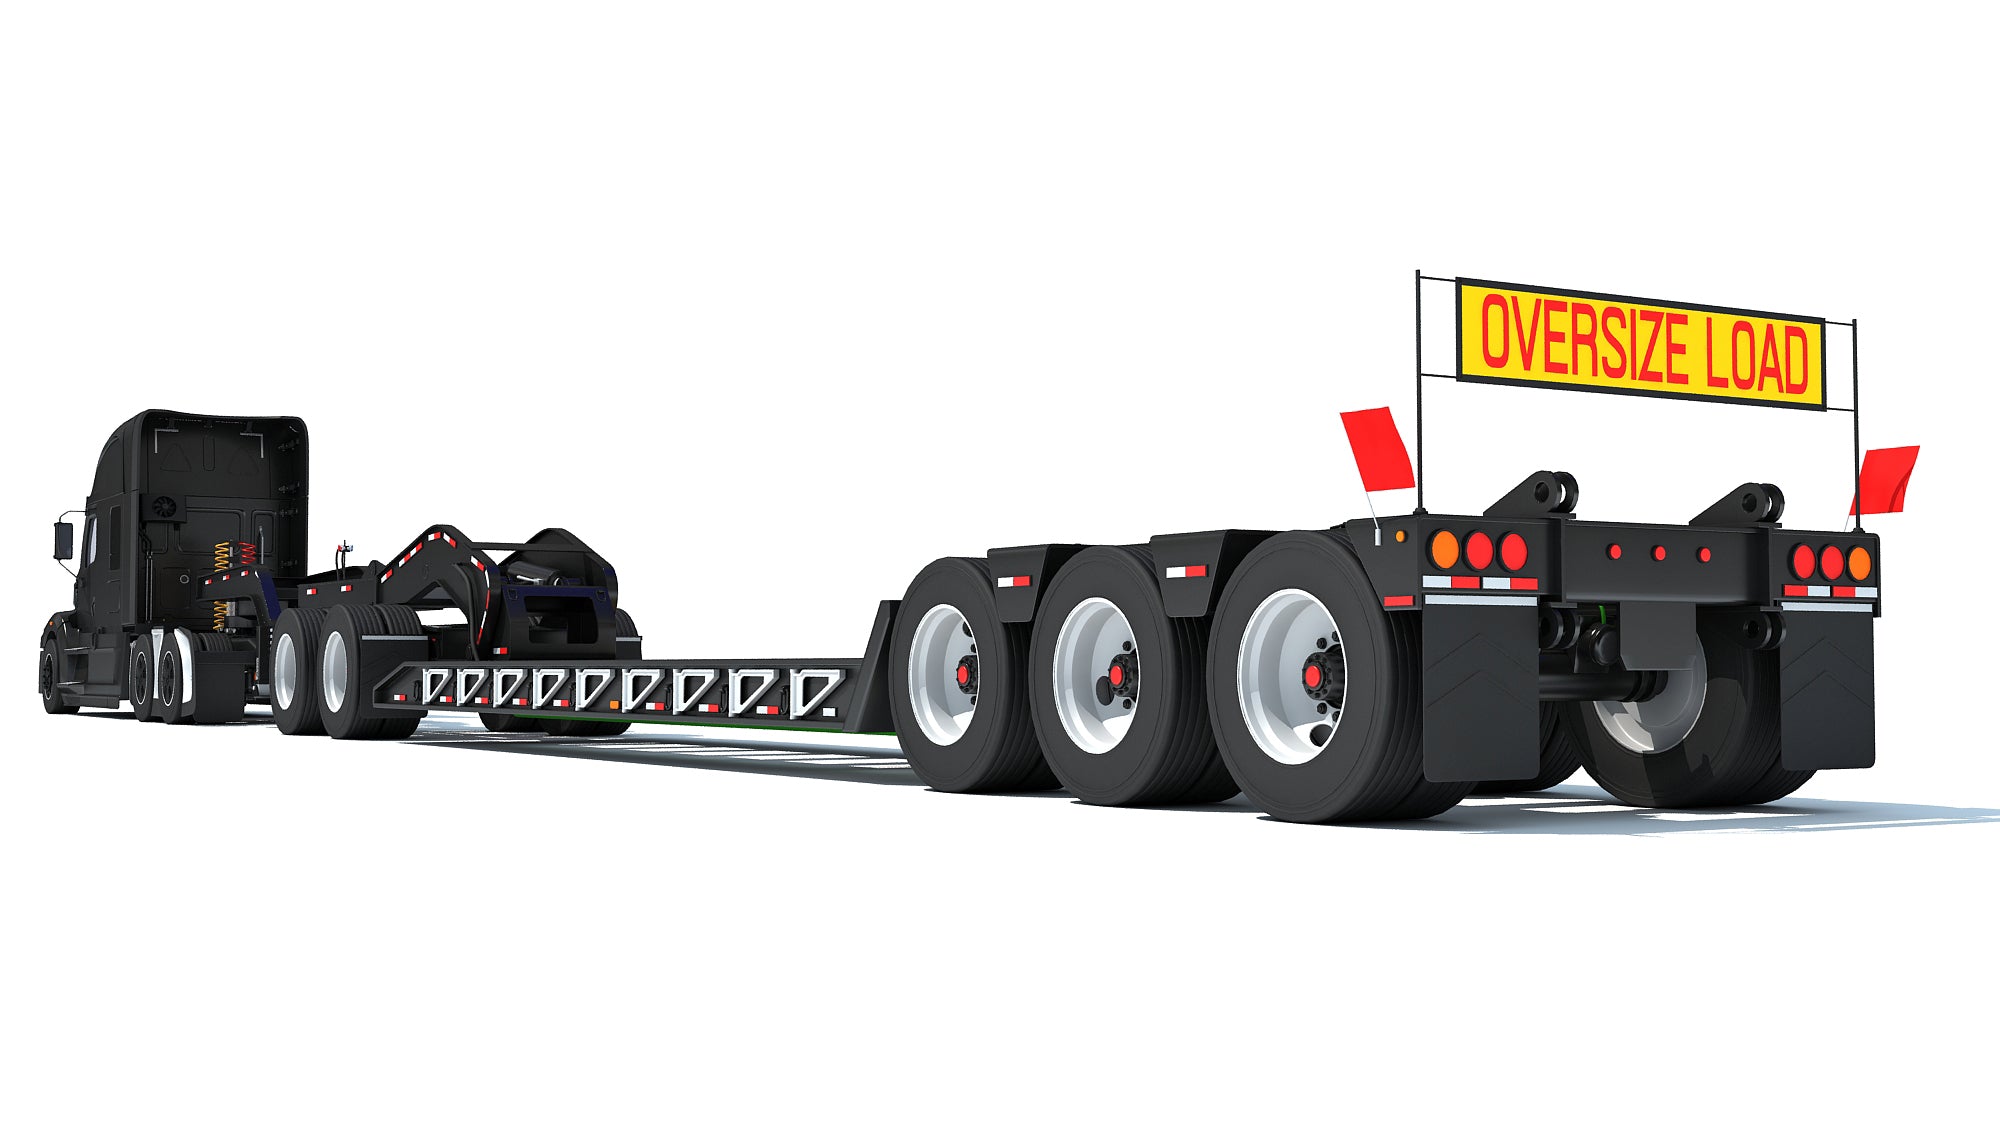 Heavy Truck with Lowboy Trailer